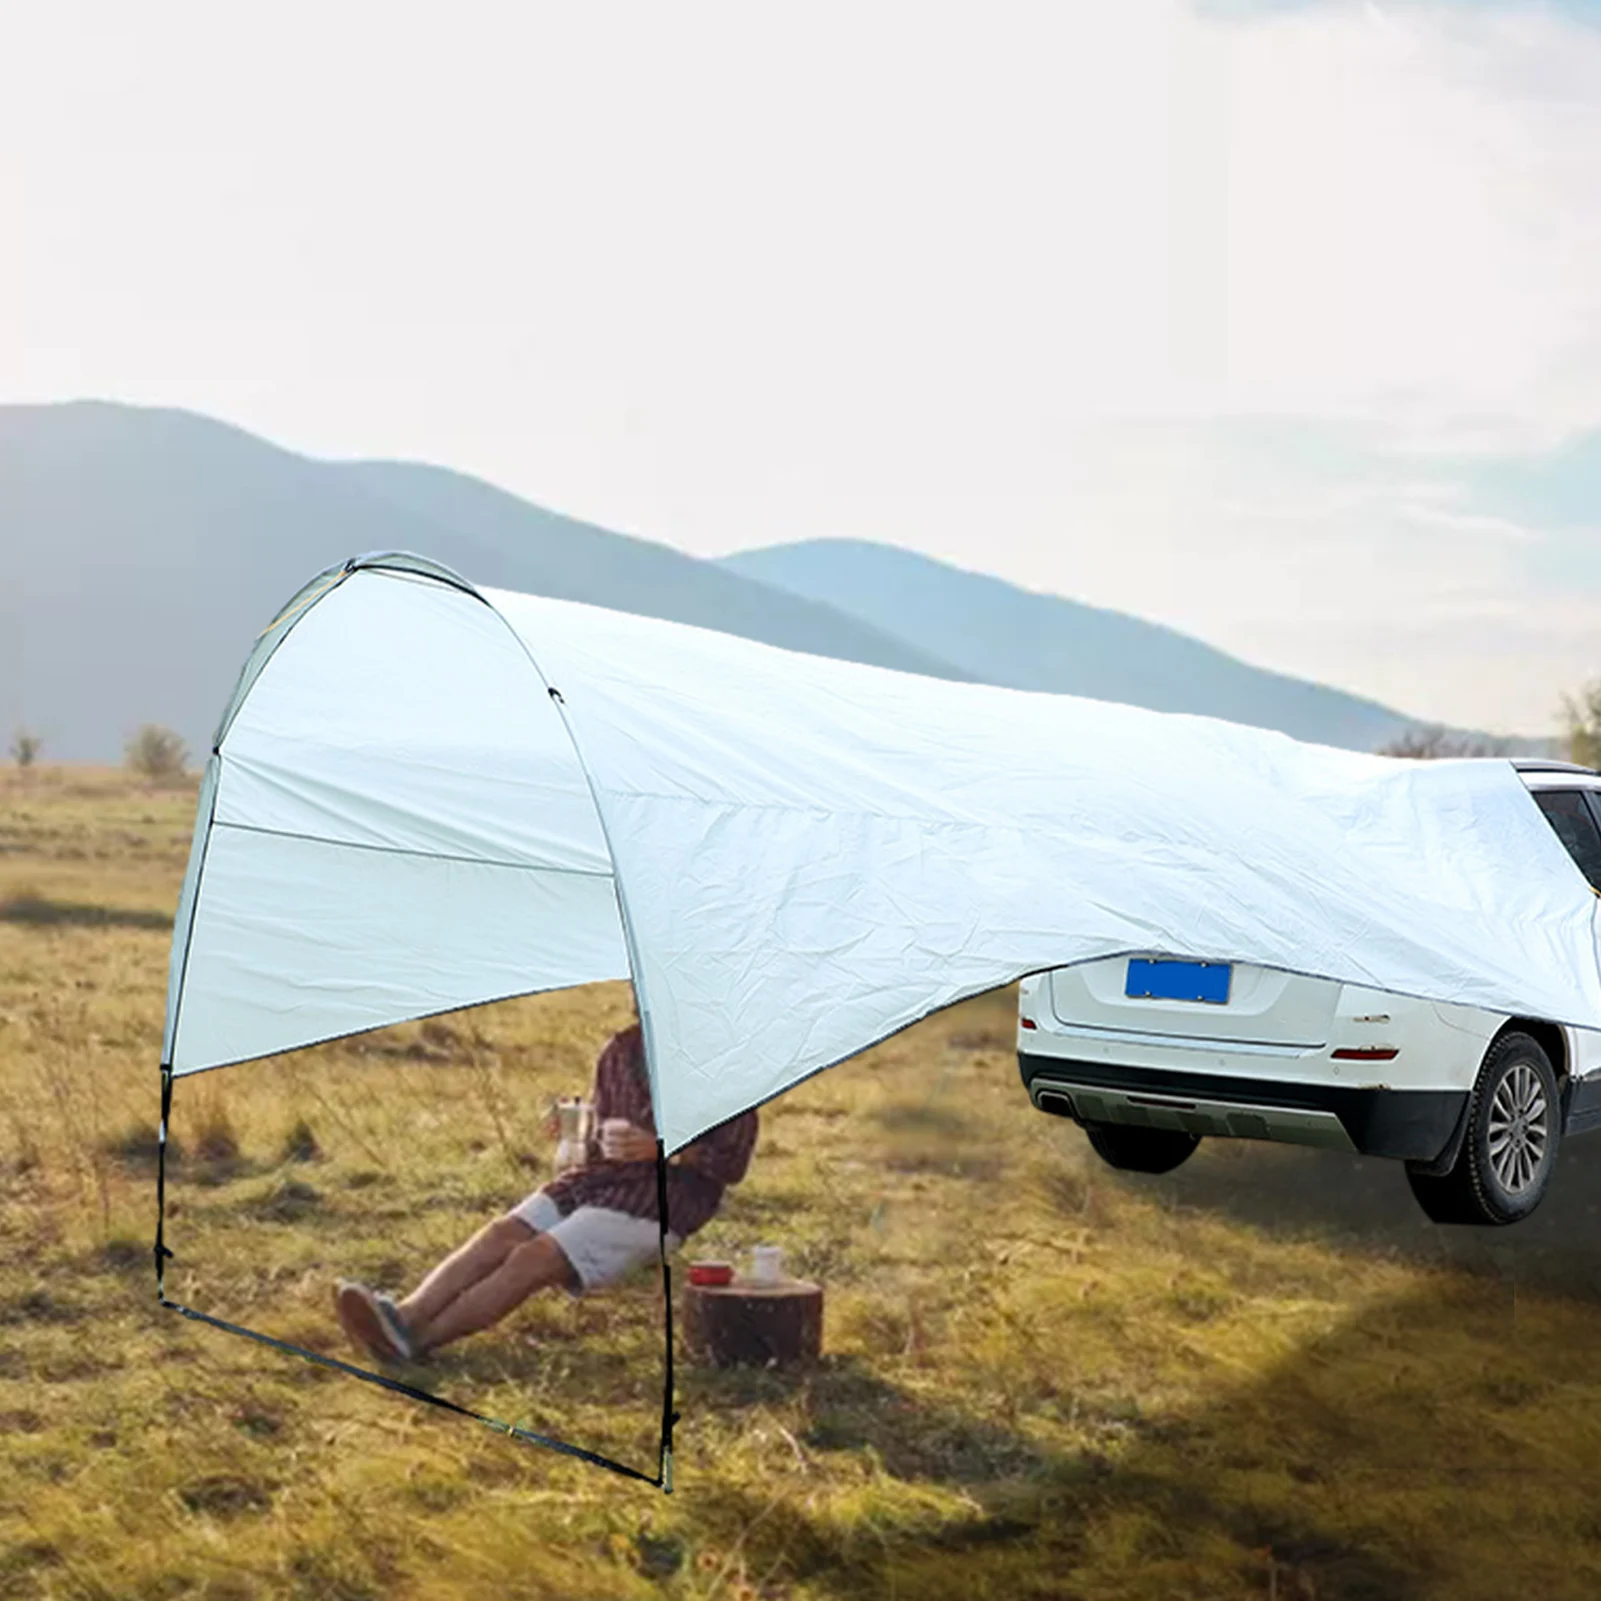 

Tailgate Shade Awning Tent Car Shade Canopy For Camping Camping Tents Lightweight Car Awning For Camping Travel Emergency Bugs